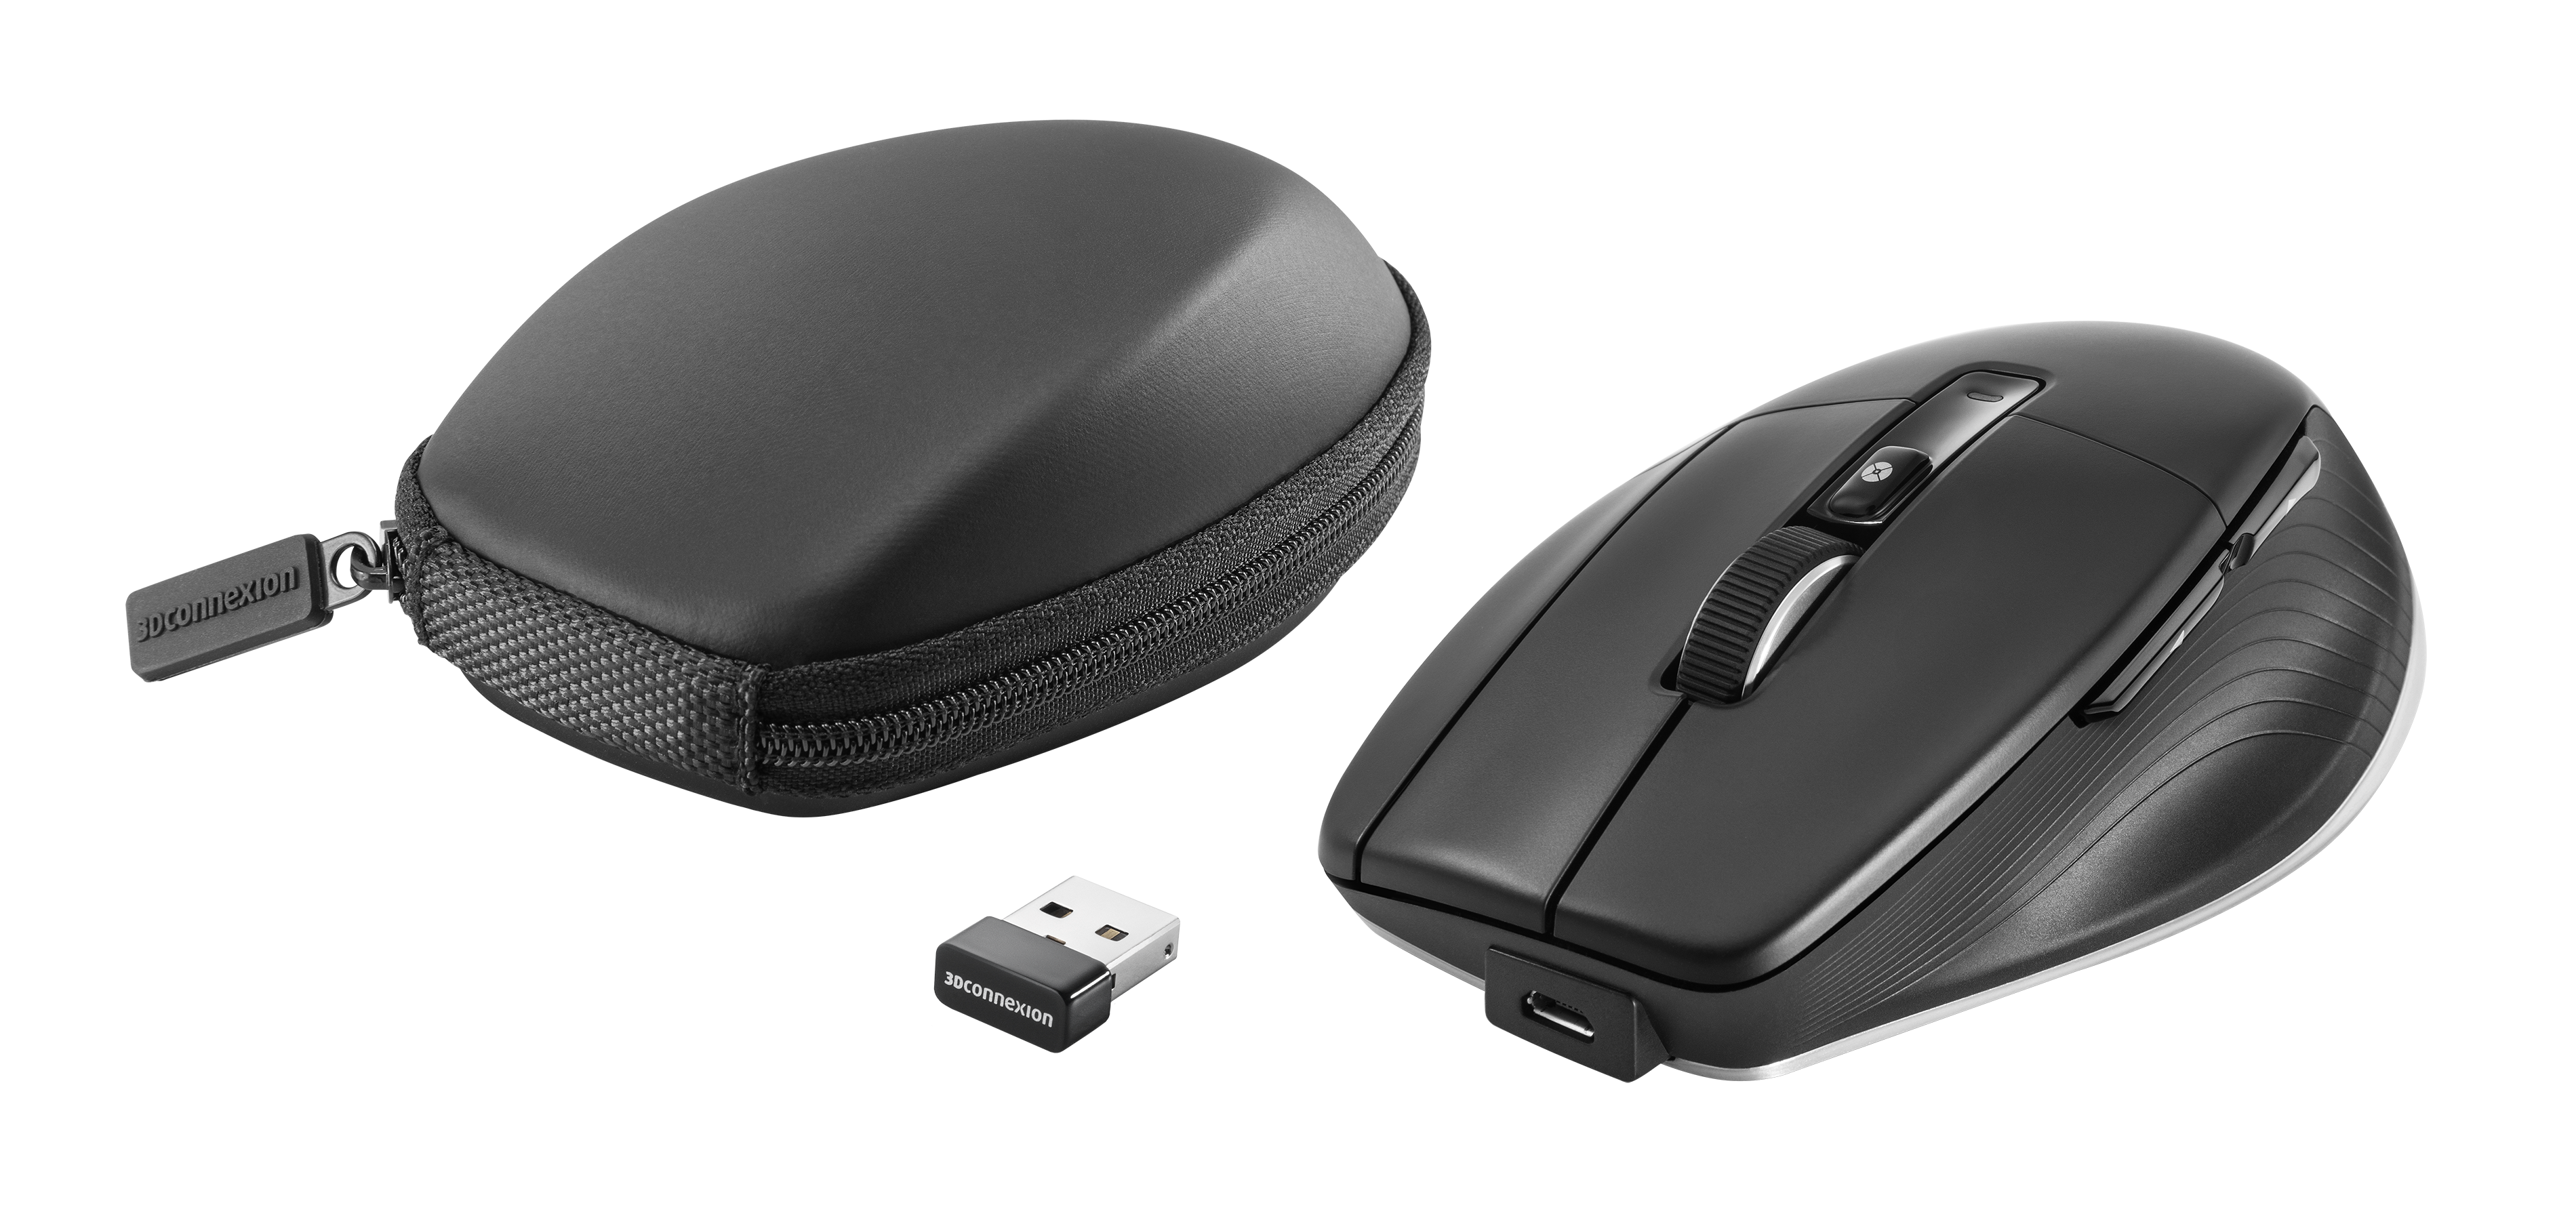 3dconnexion Upgrades With Cadmouse Wireless Pro Develop3d